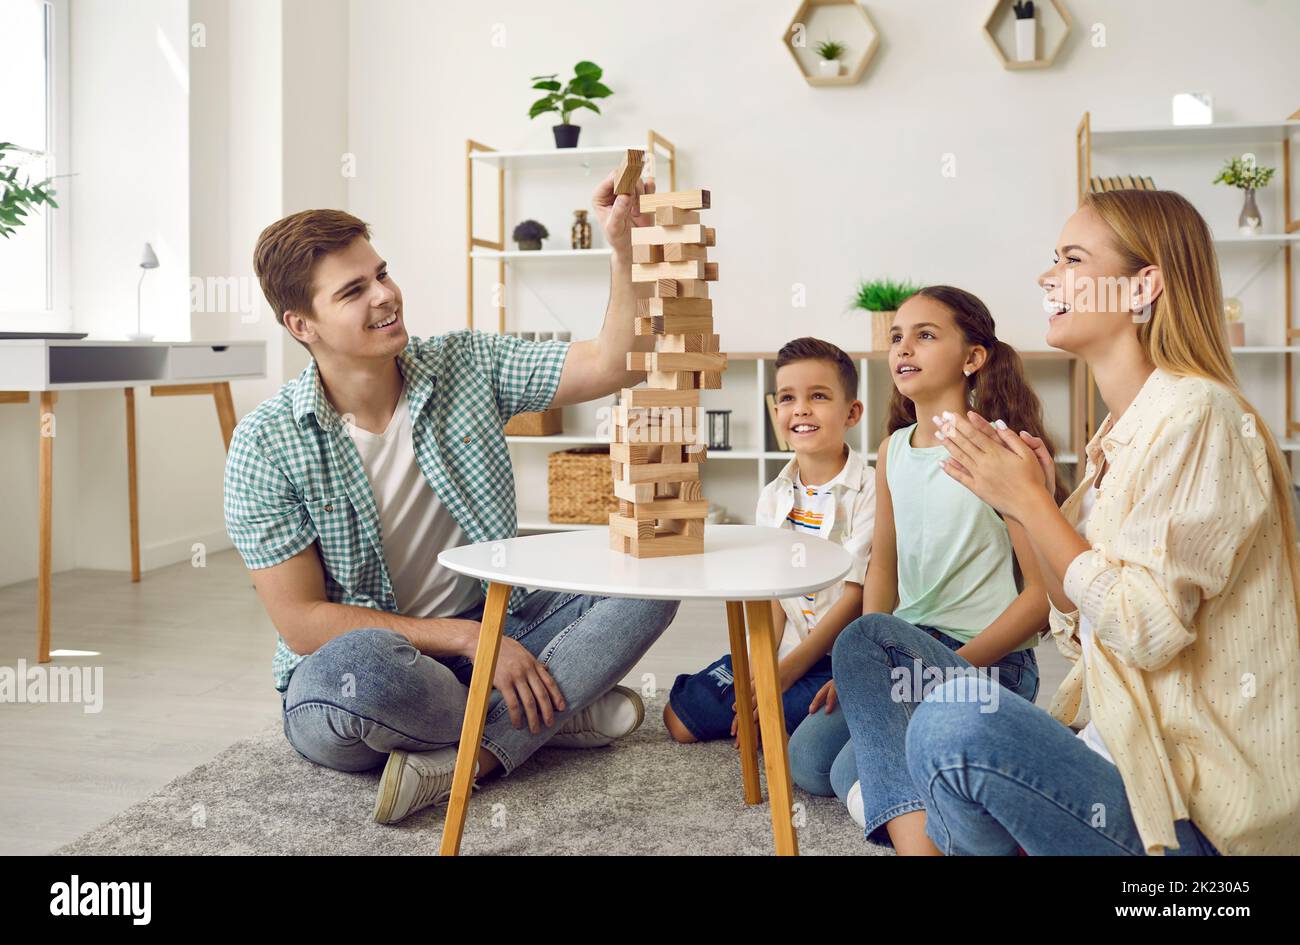 Young parents and their two young children are having fun playing Jenga together. Stock Photo